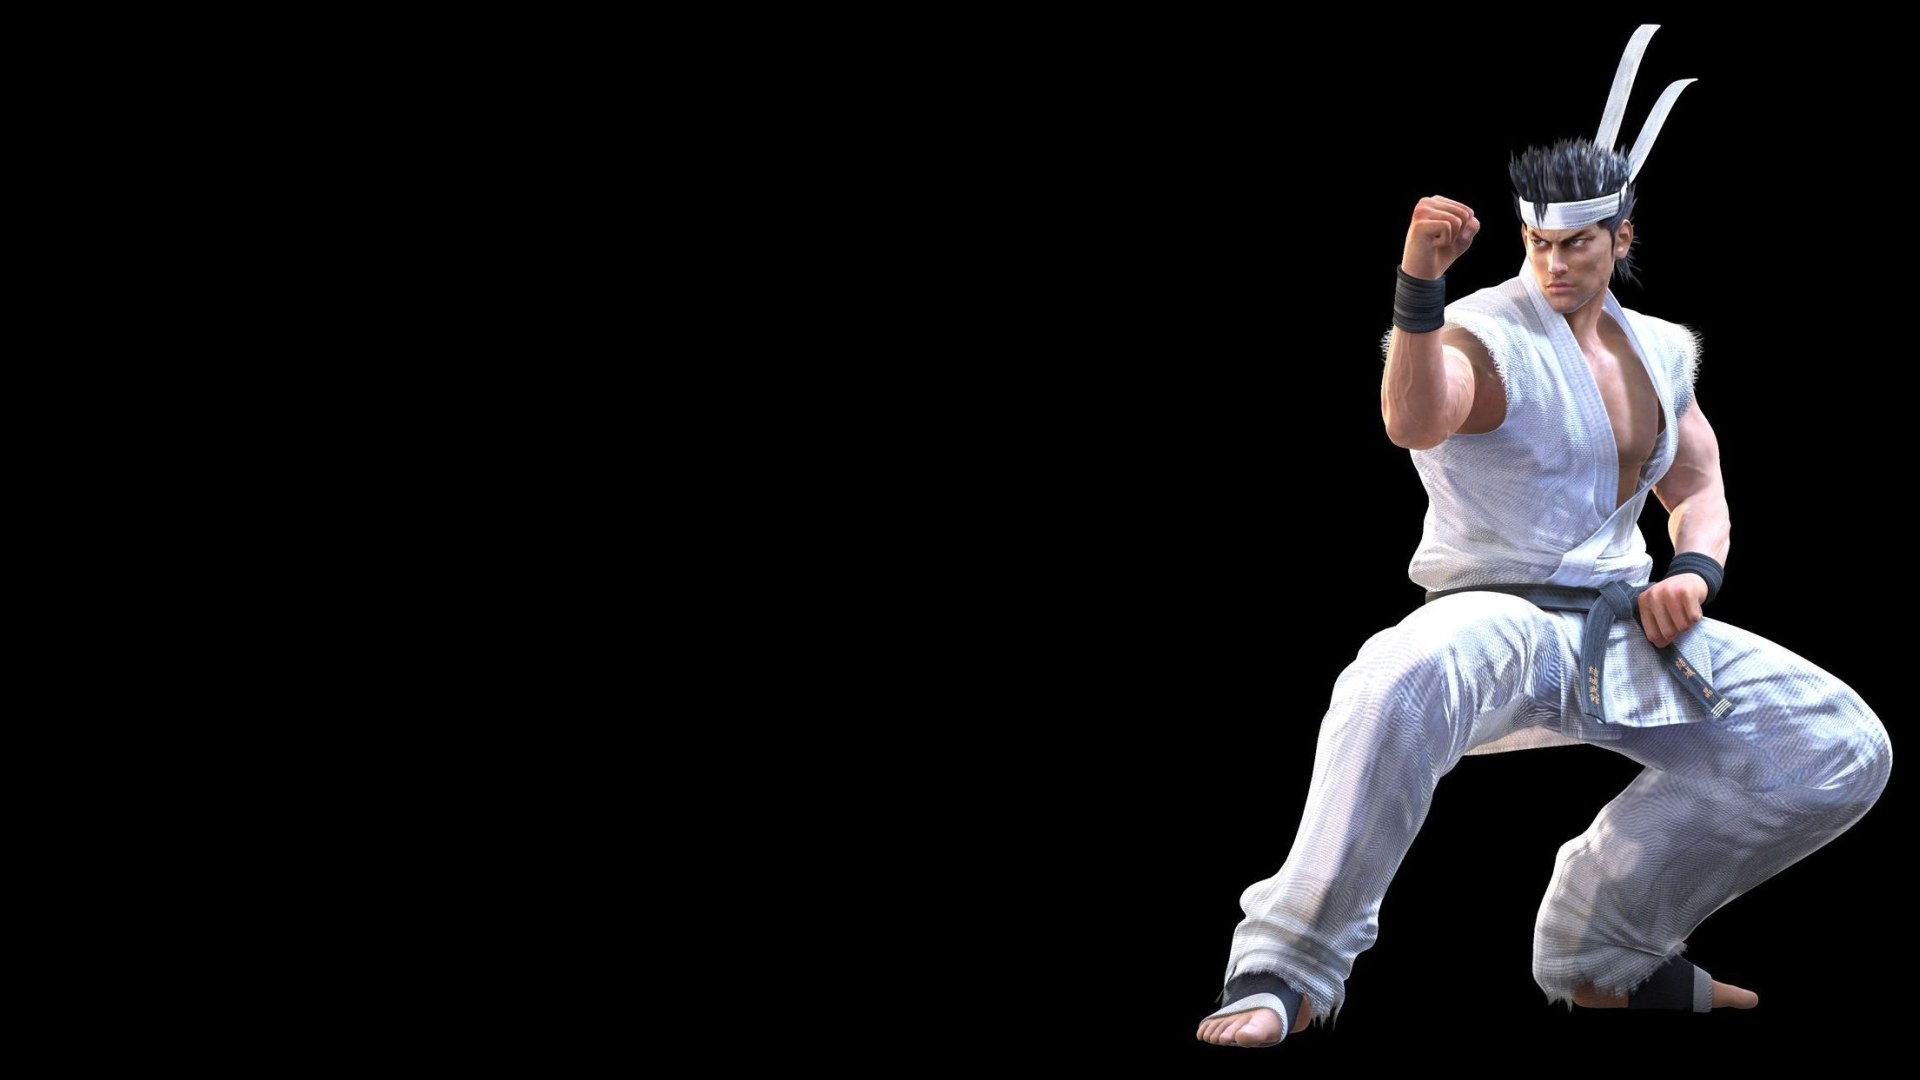 Video Game Virtua Fighter 4 HD Wallpaper | Background Image